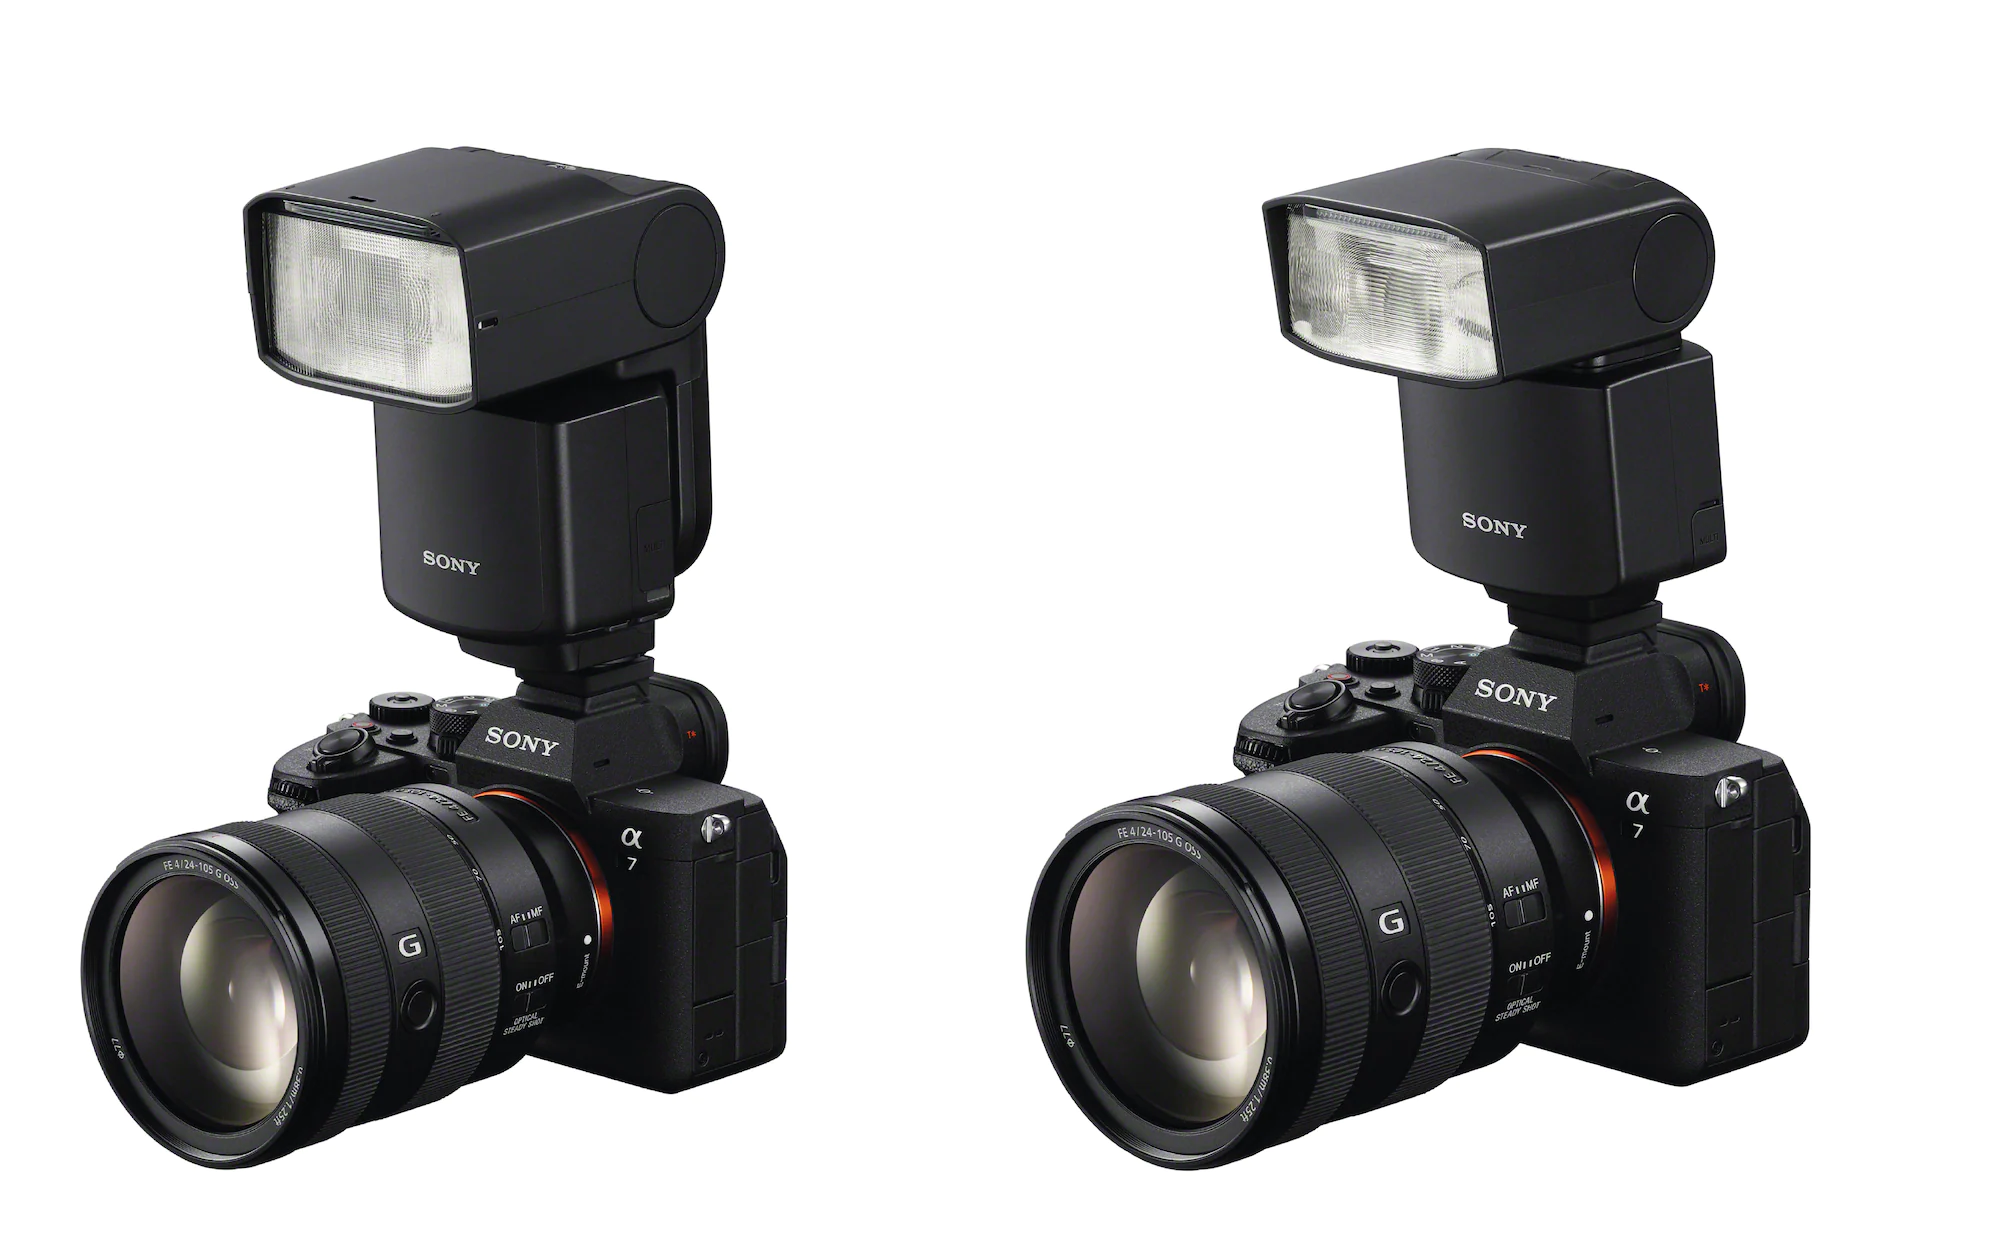 Introducing HVL-F60RM2, HVL-F46RM, External Flash with Wireless Radio  Control, Sony